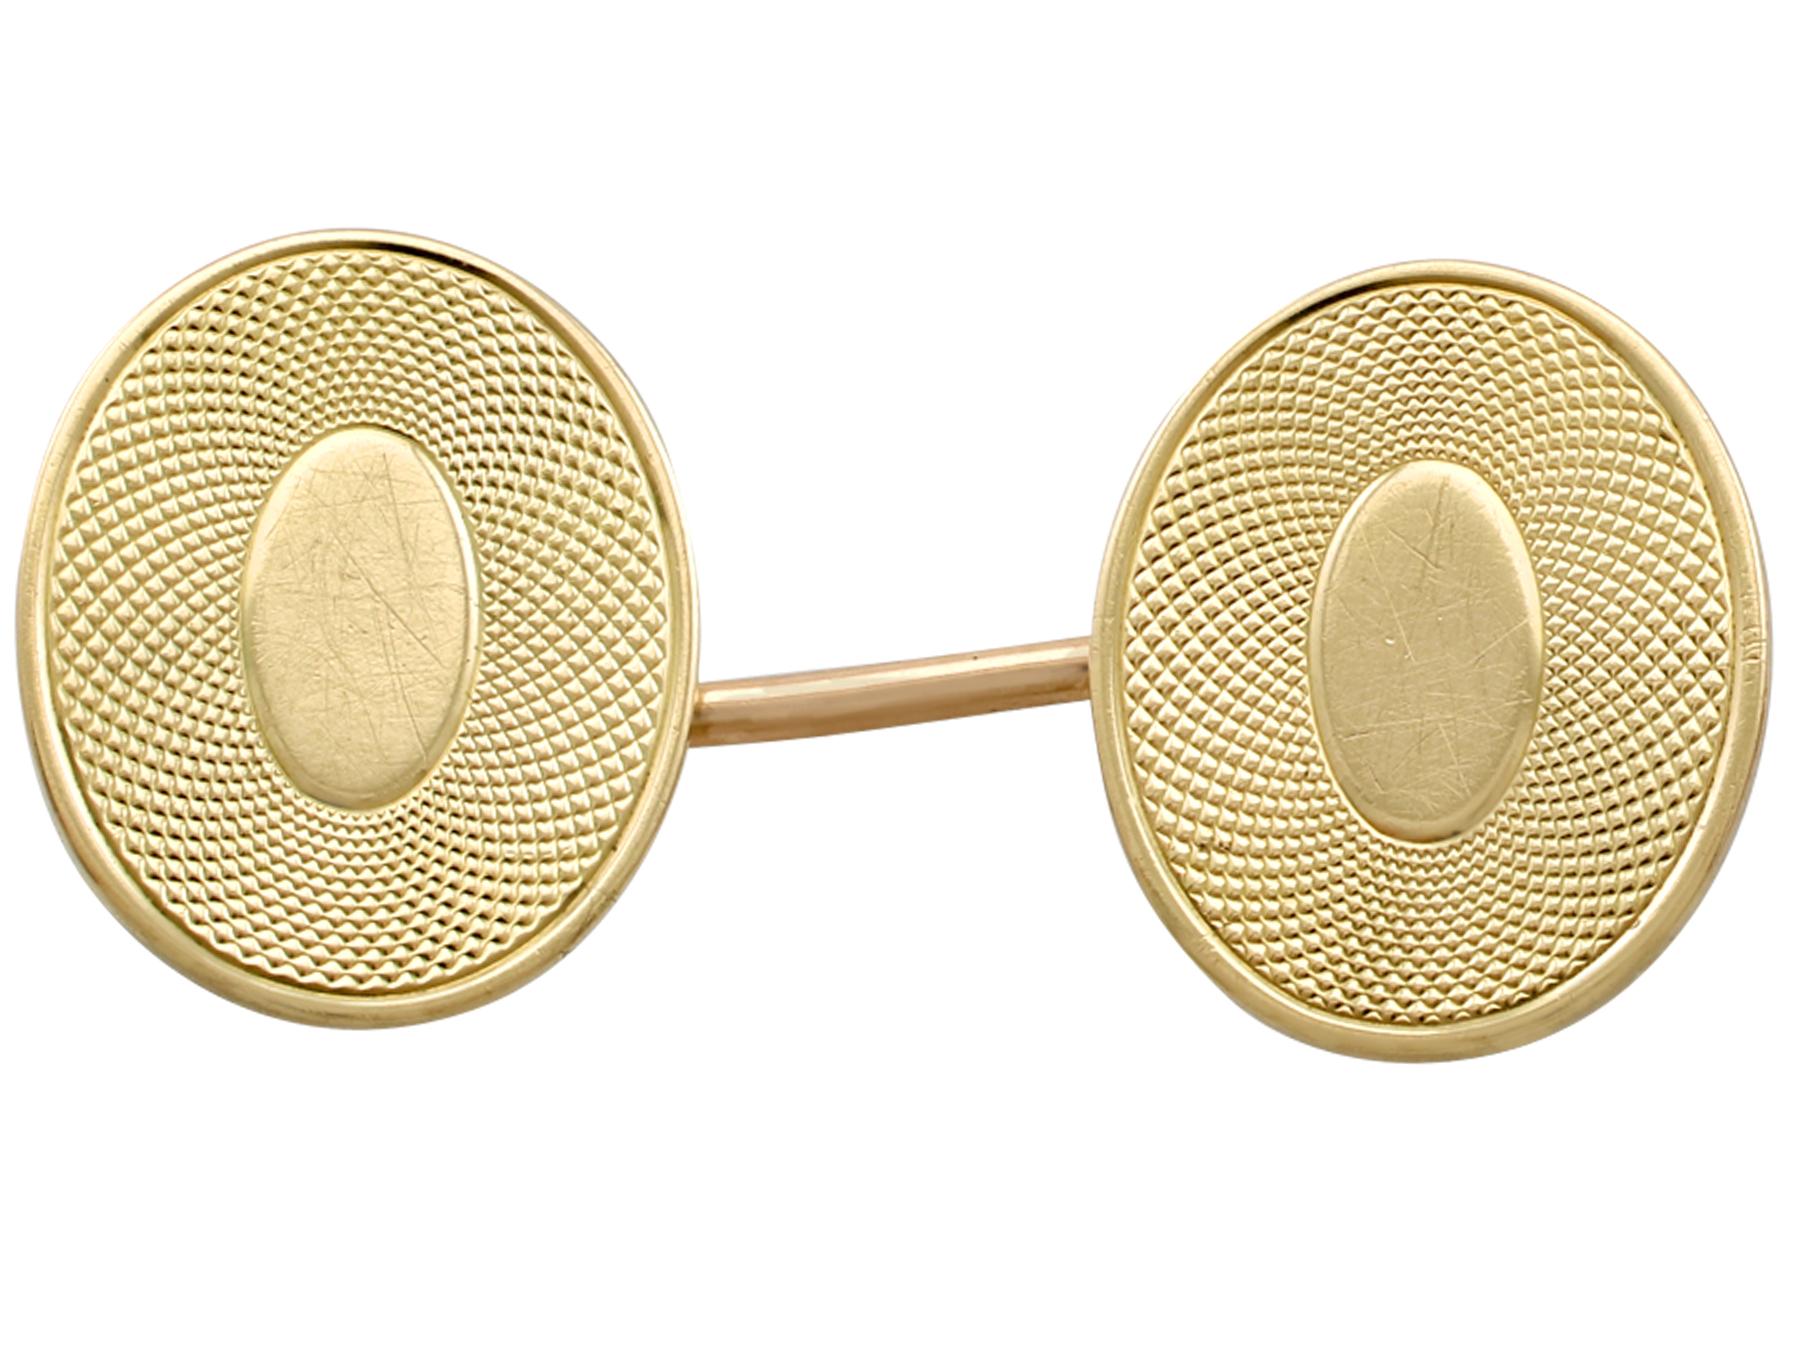 Antique Victorian Cufflinks in Yellow Gold, circa 1890 In Excellent Condition For Sale In Jesmond, Newcastle Upon Tyne